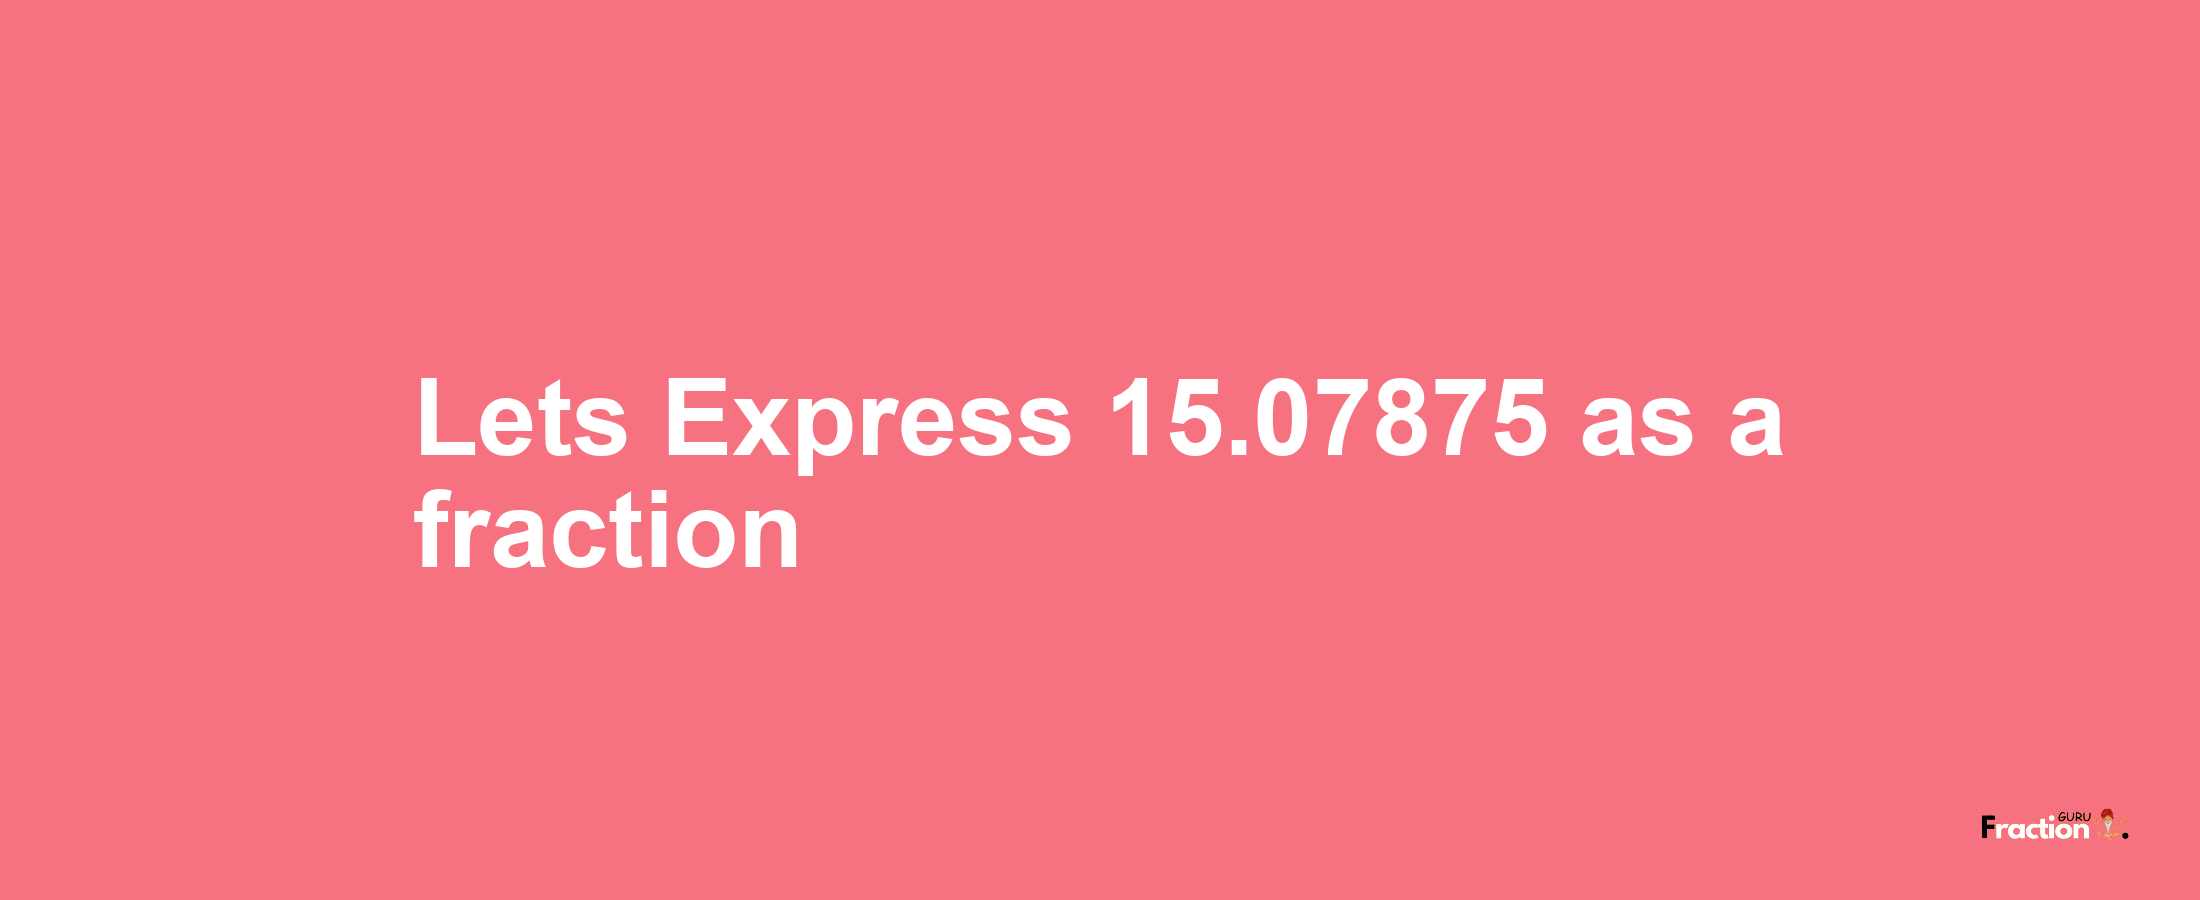 Lets Express 15.07875 as afraction